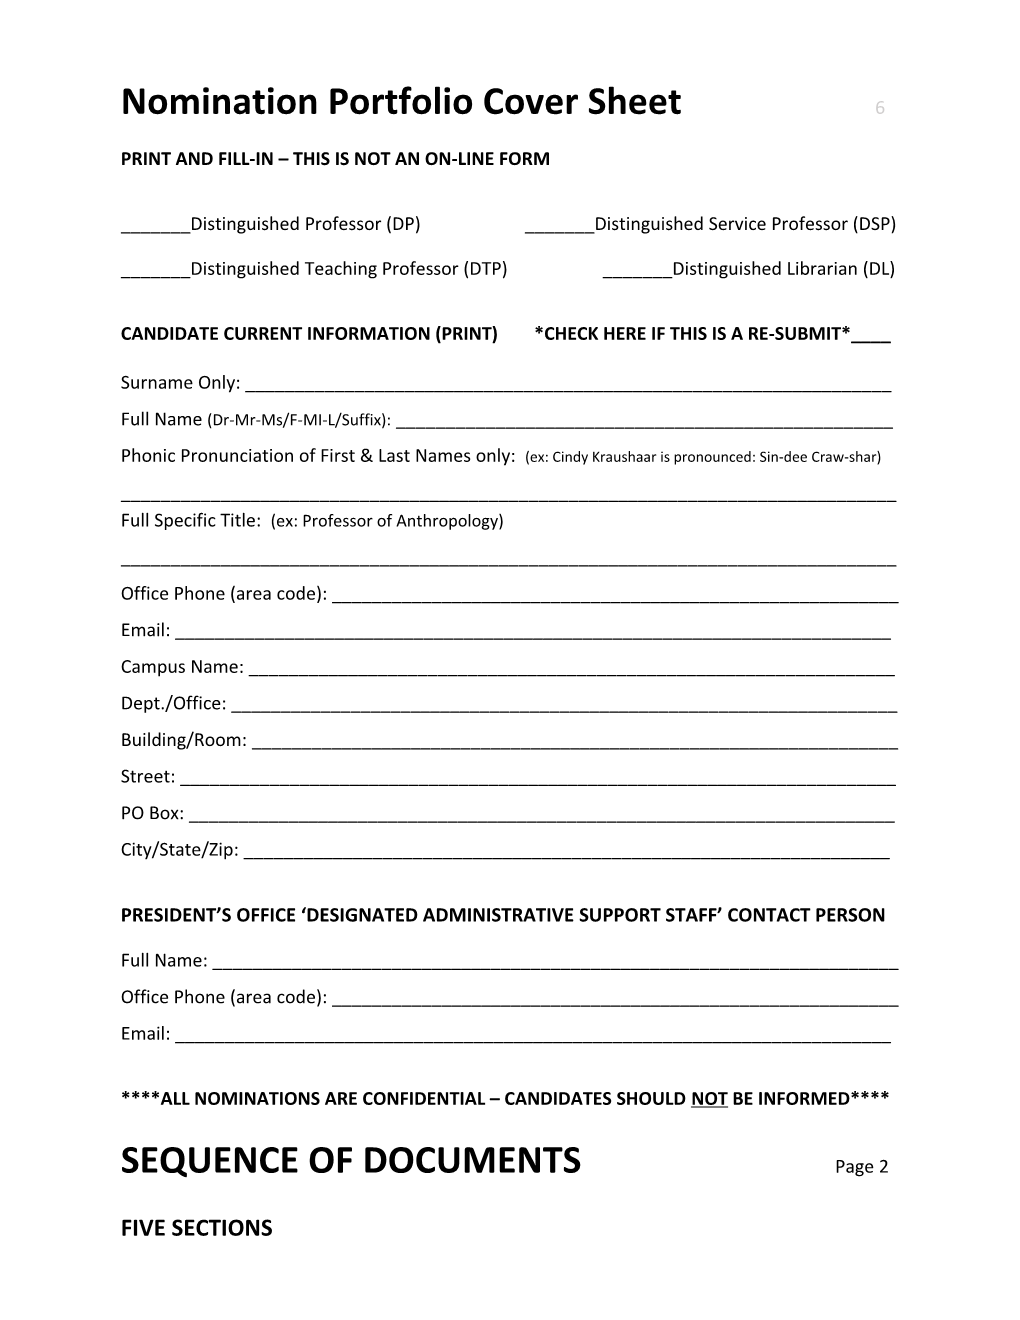 Print and Fill-In This Is Not an On-Line Form